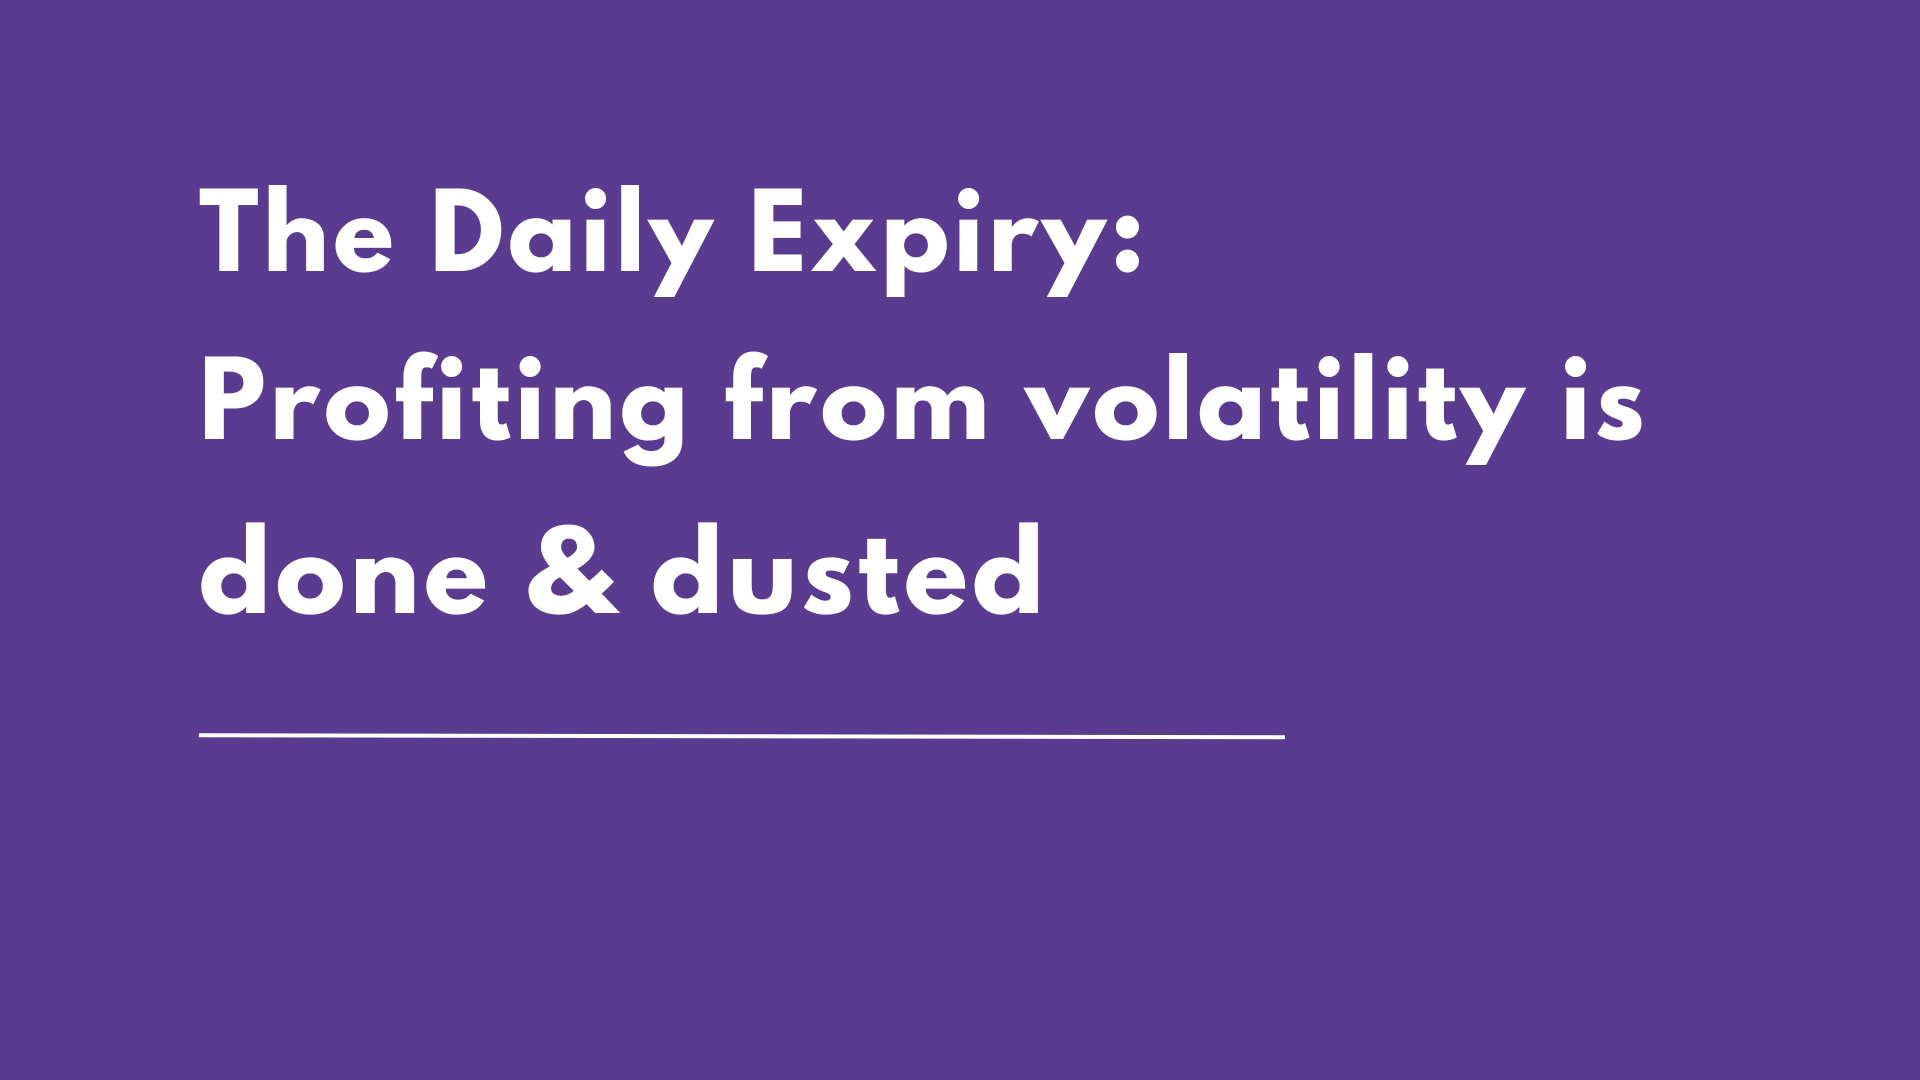 The daily expiry: Profiting from volatility is done & dusted